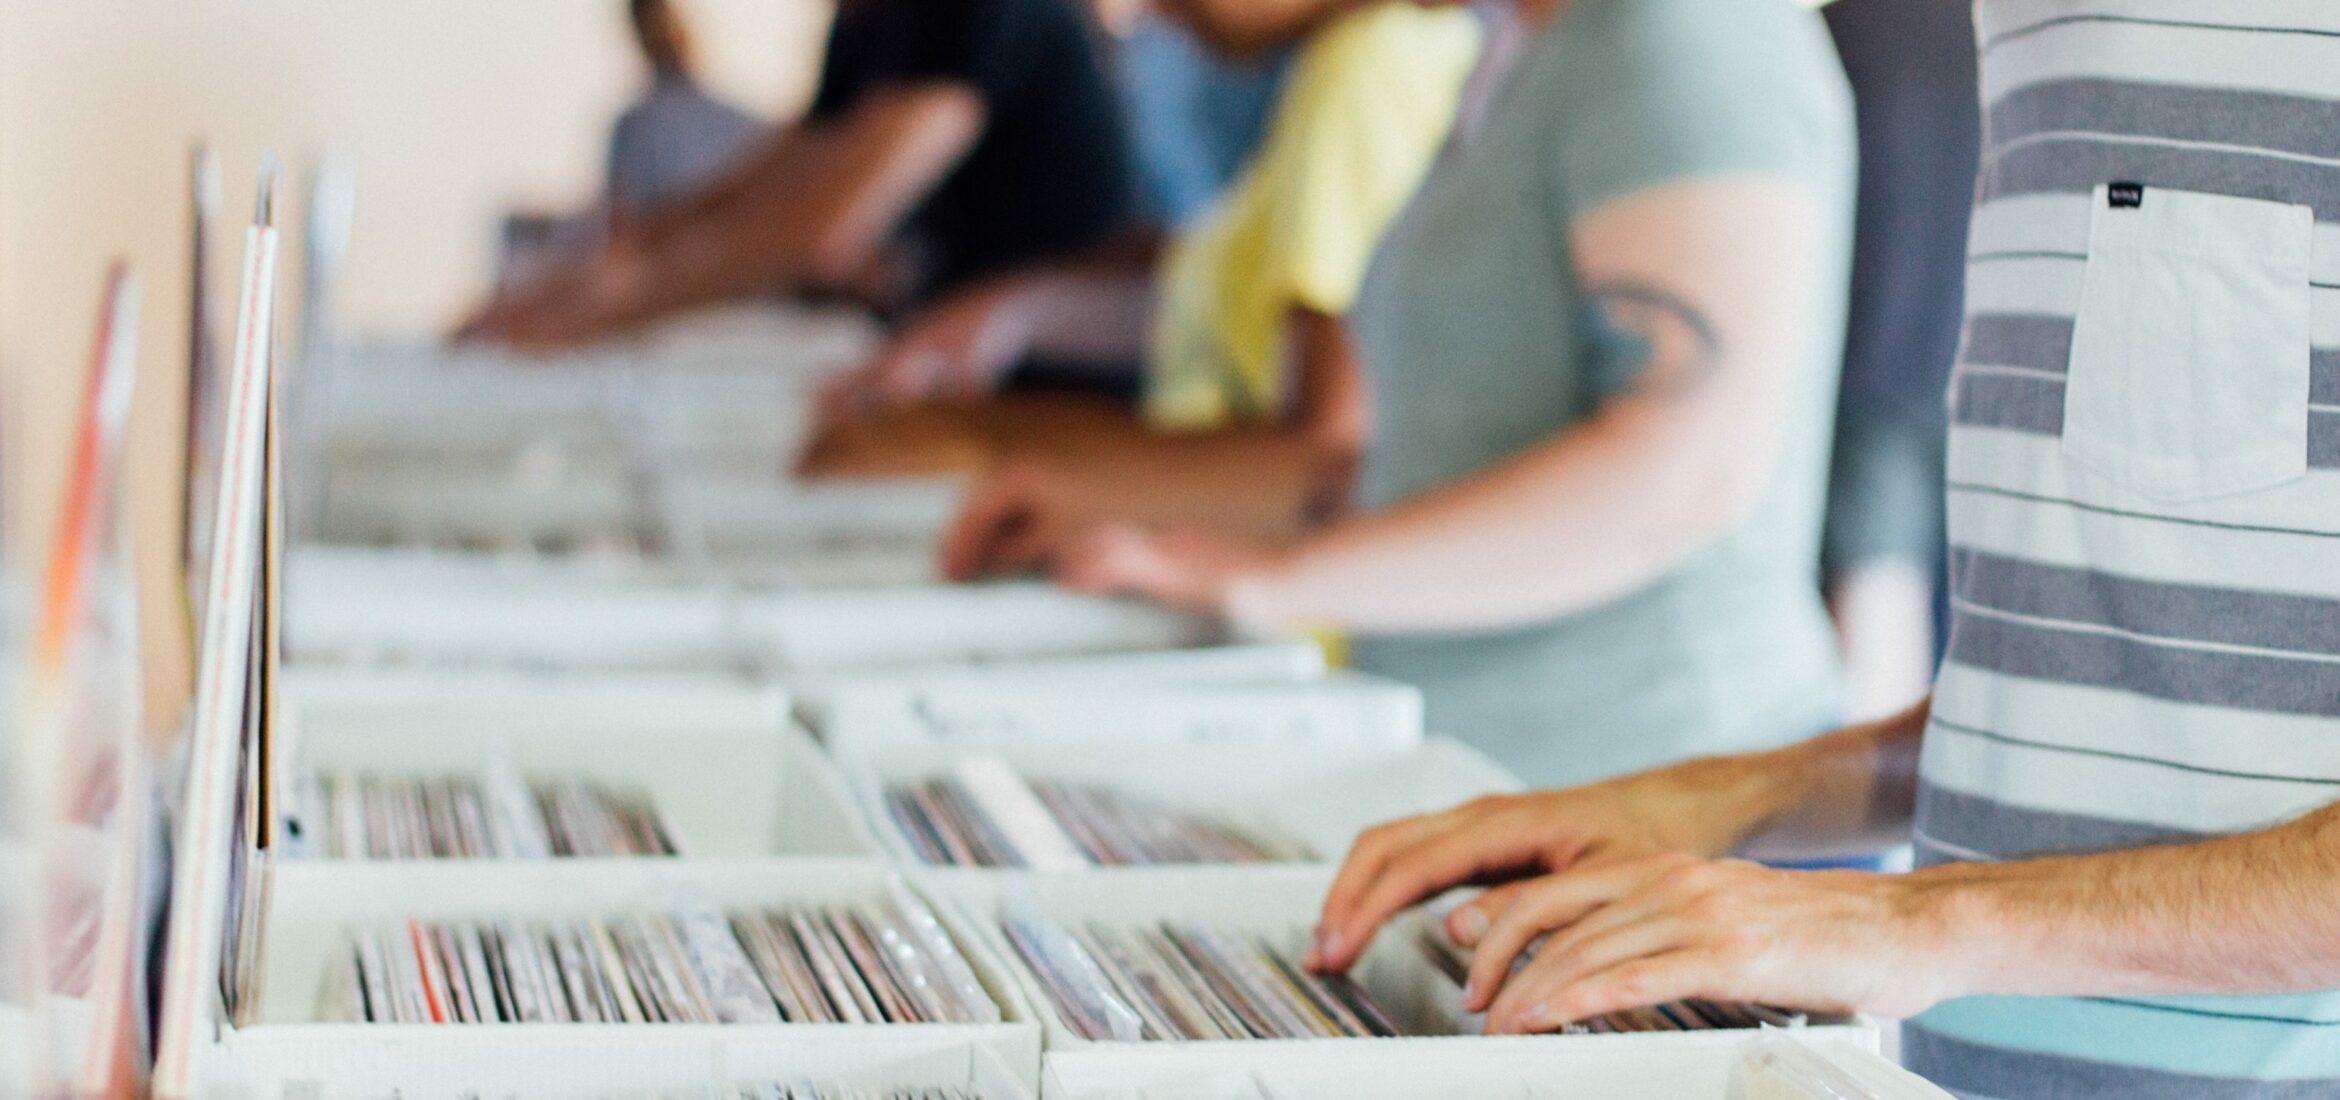 7 Tips to distribute your music to record labels